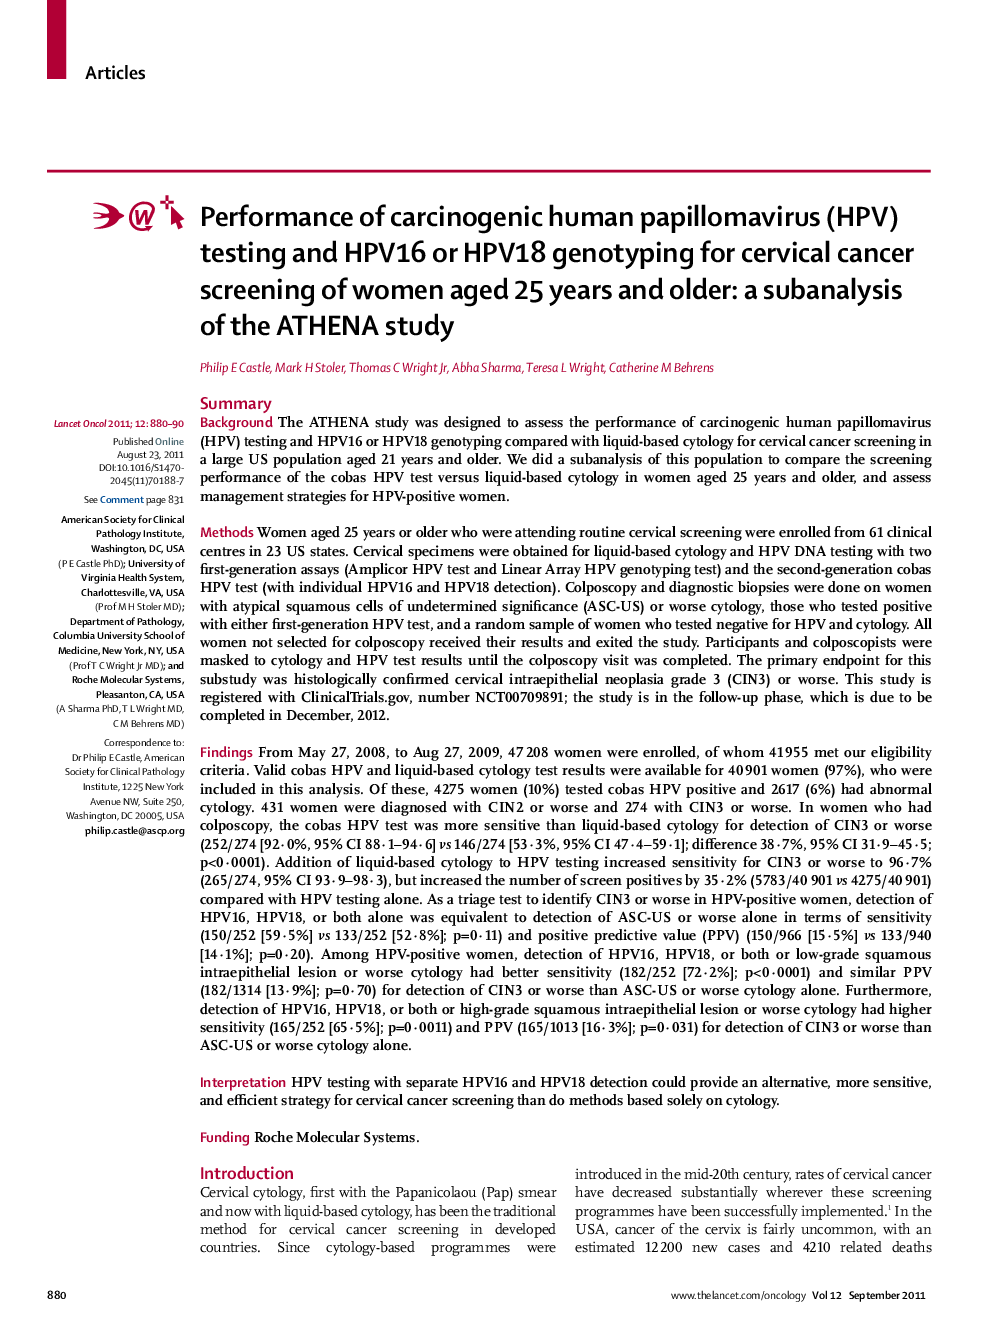 Performance of carcinogenic human papillomavirus (HPV) testing and HPV16 or HPV18 genotyping for cervical cancer screening of women aged 25 years and older: a subanalysis of the ATHENA study